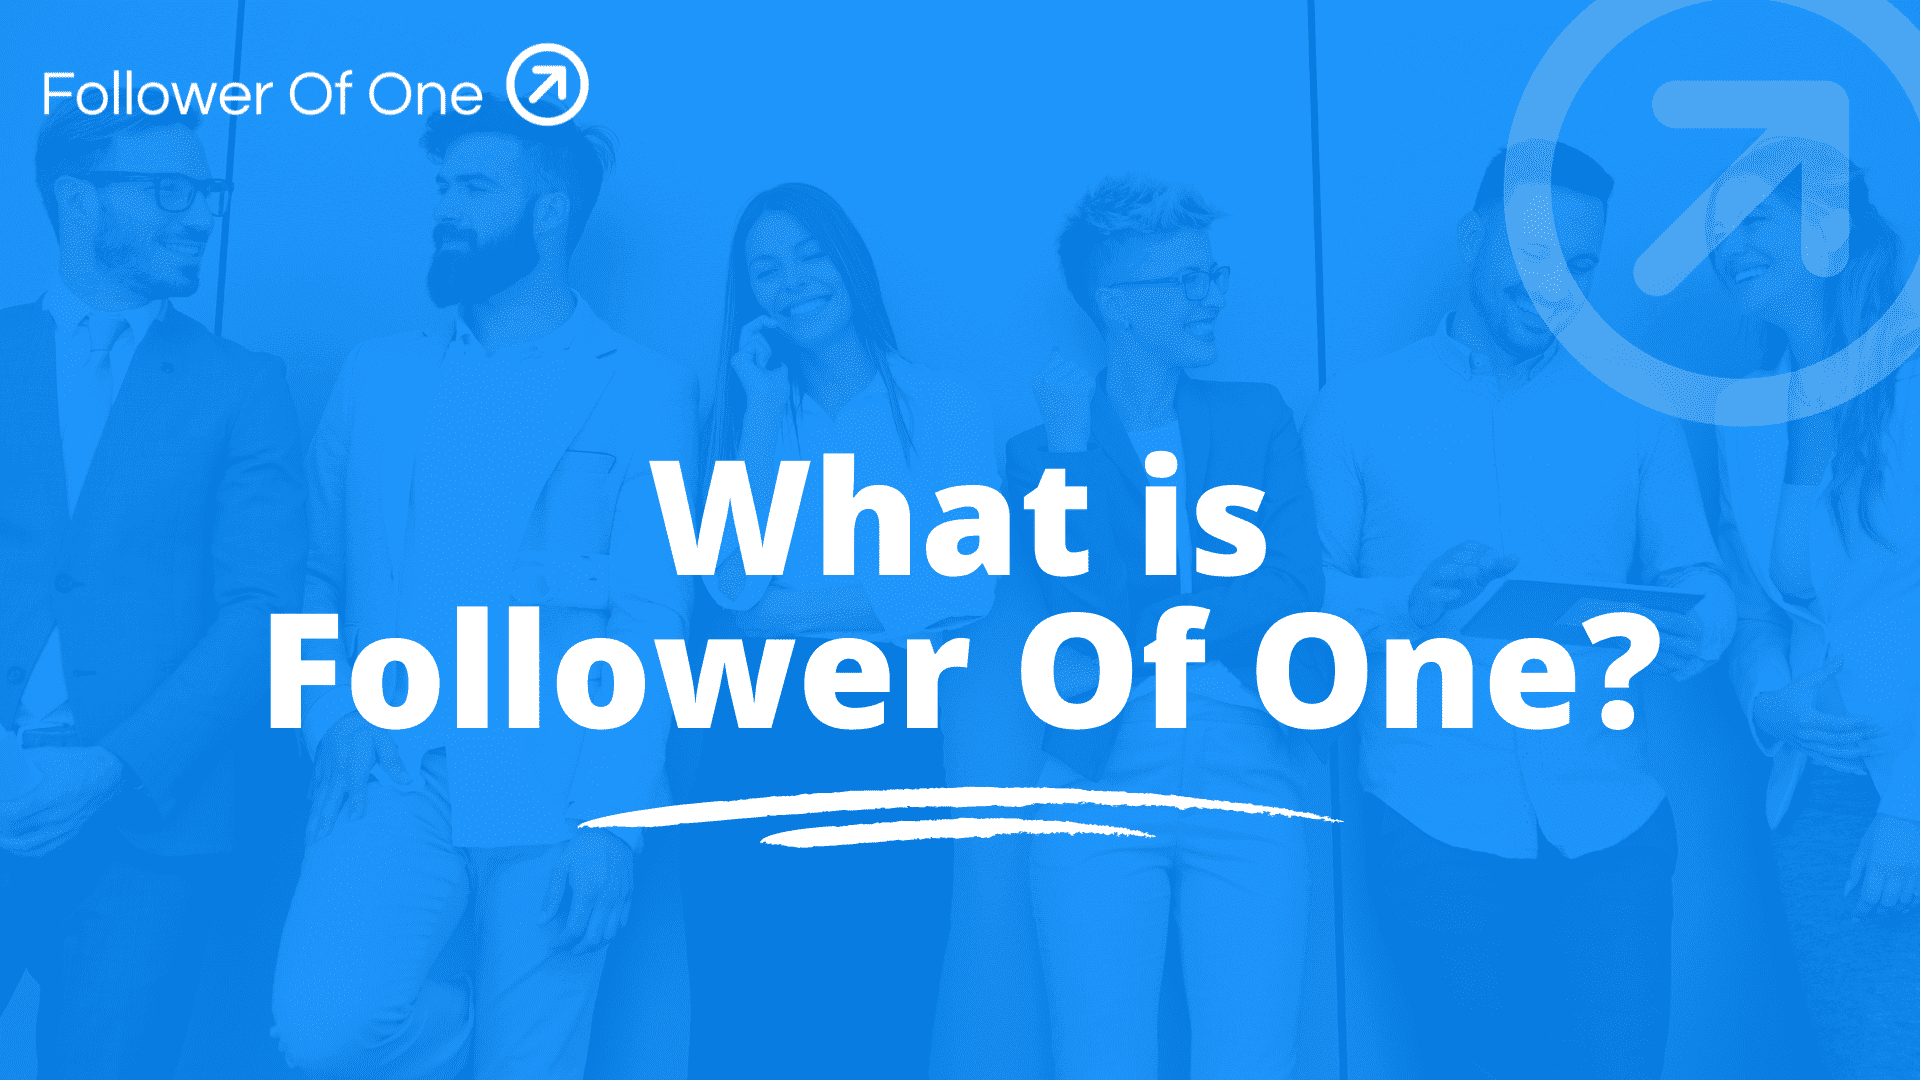 What is Follower Of One